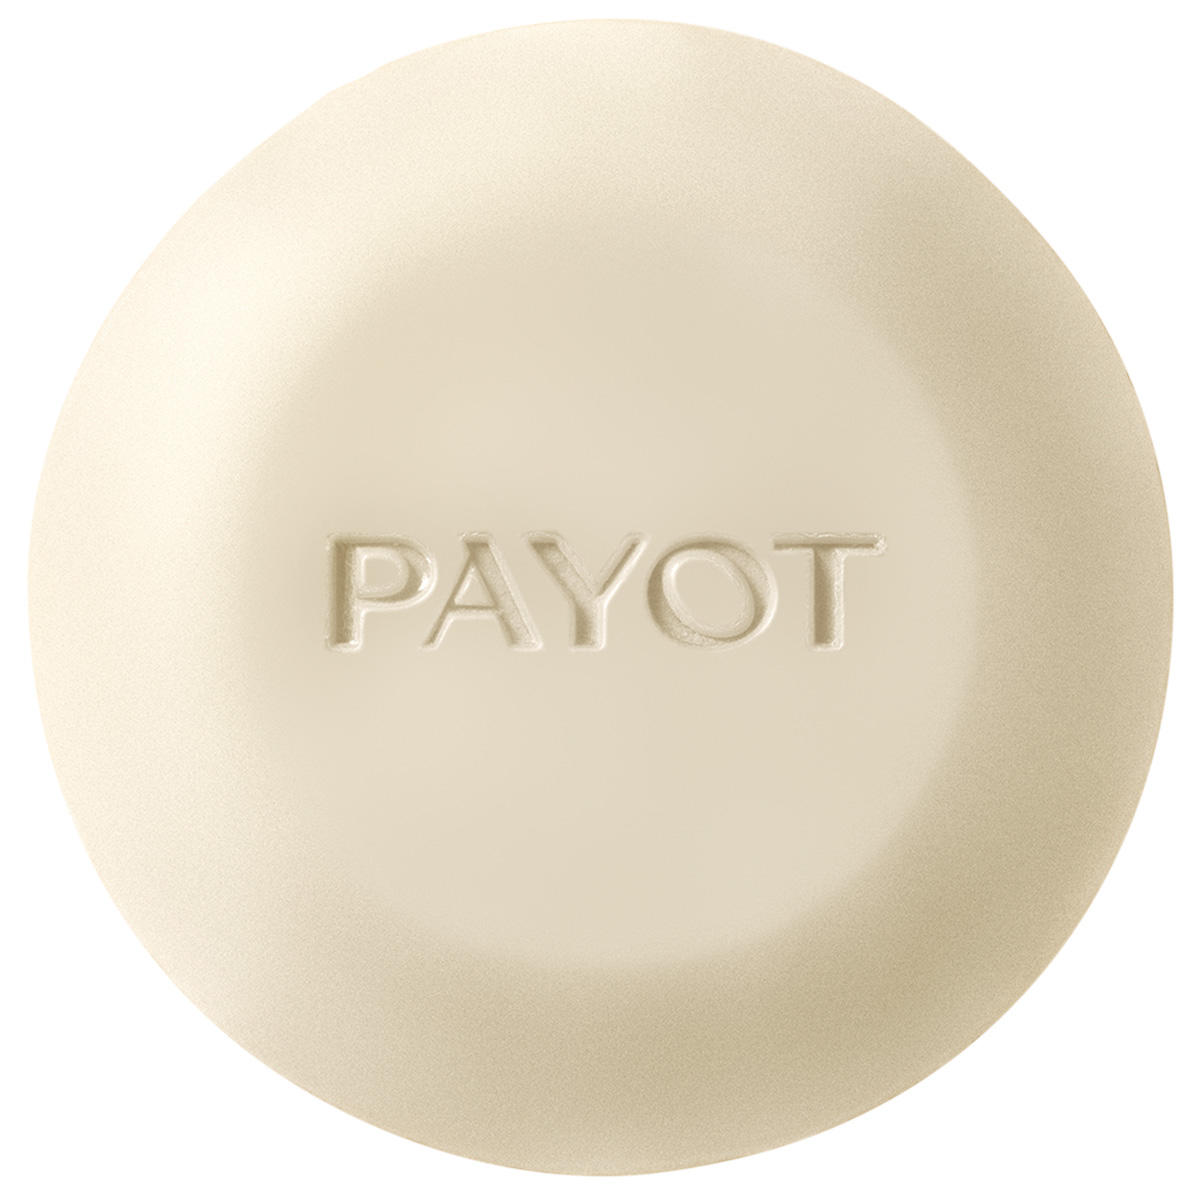 Payot Essentiel Shampoing solide biome-friendly 80 g - 1